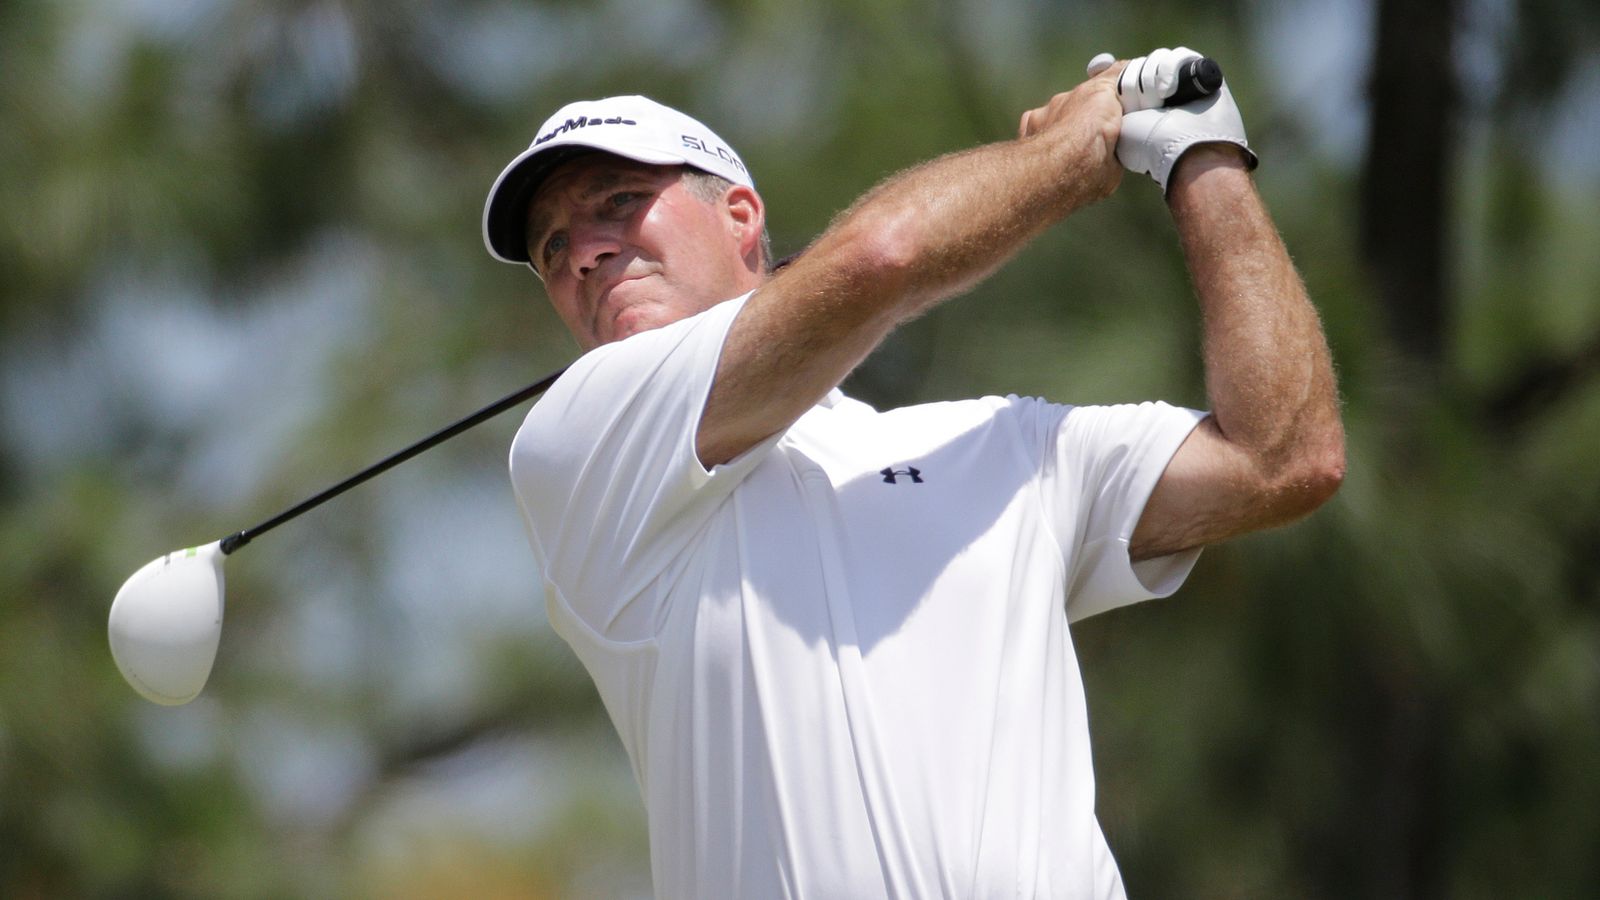 Fran Quinn qualifies for US Open at 57-years-old, after failing to make US Senior Open